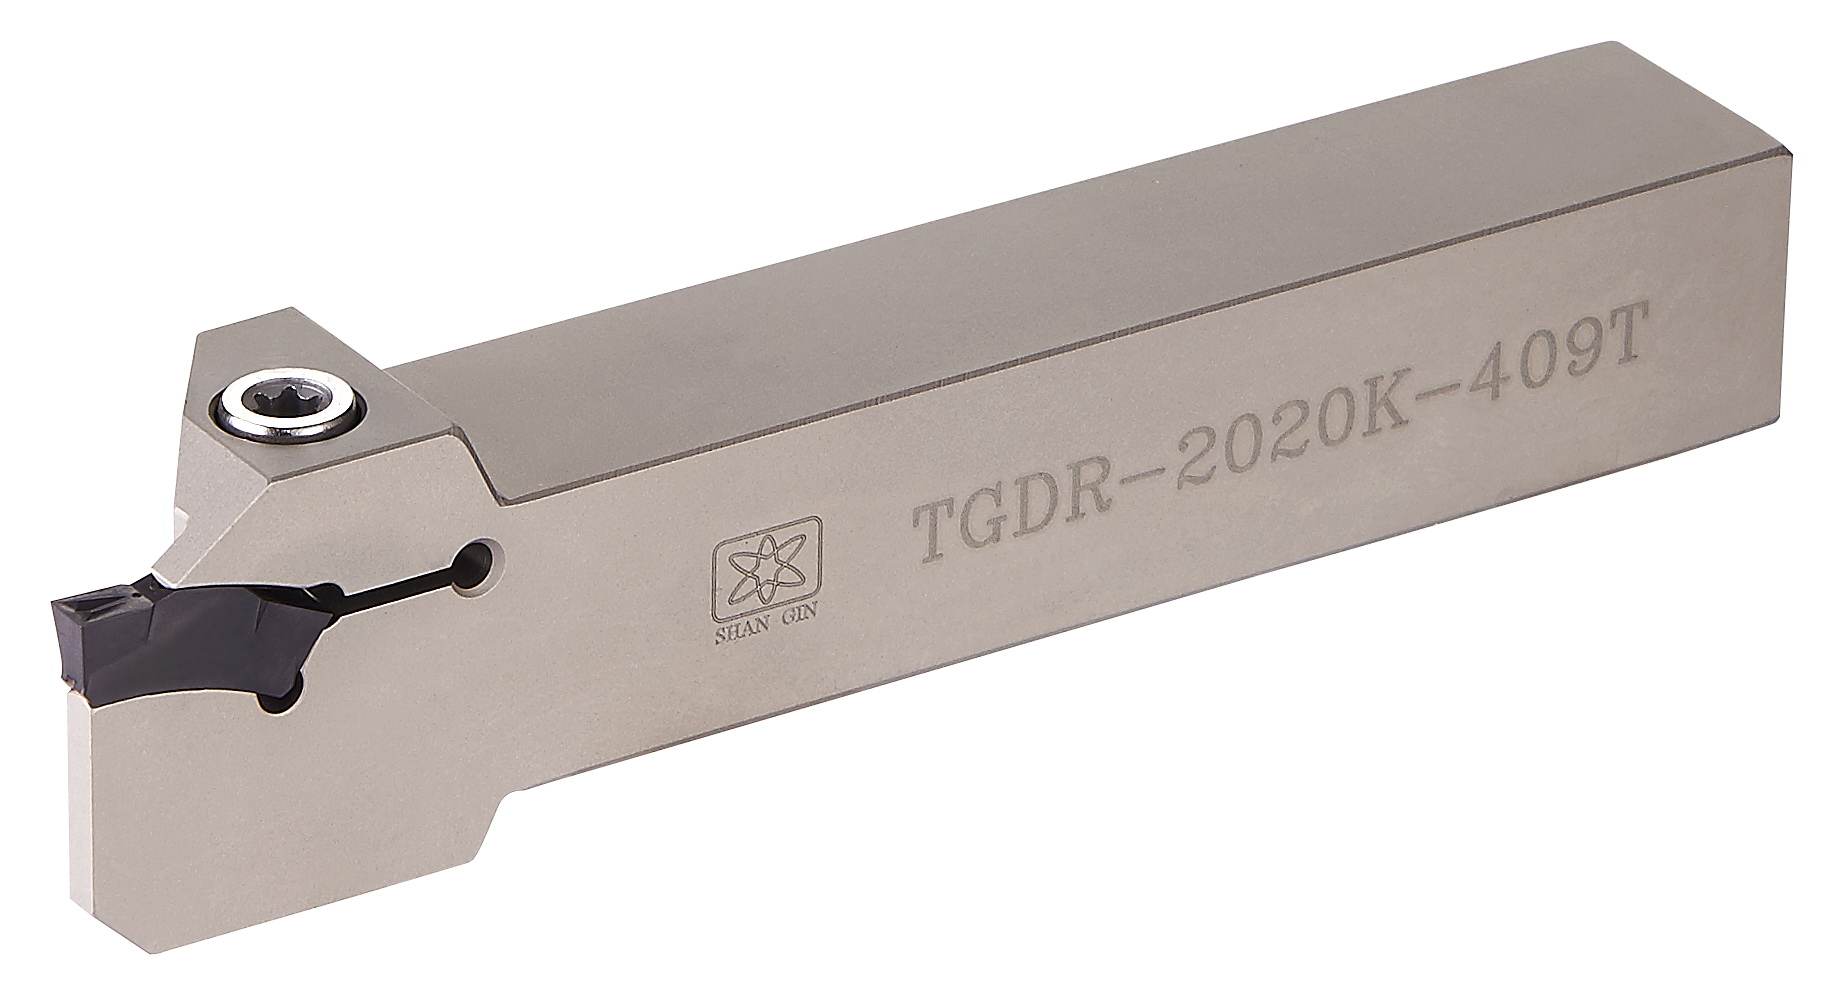 Products|TGDR (TGFM302~402) External Grooving Tool Holder